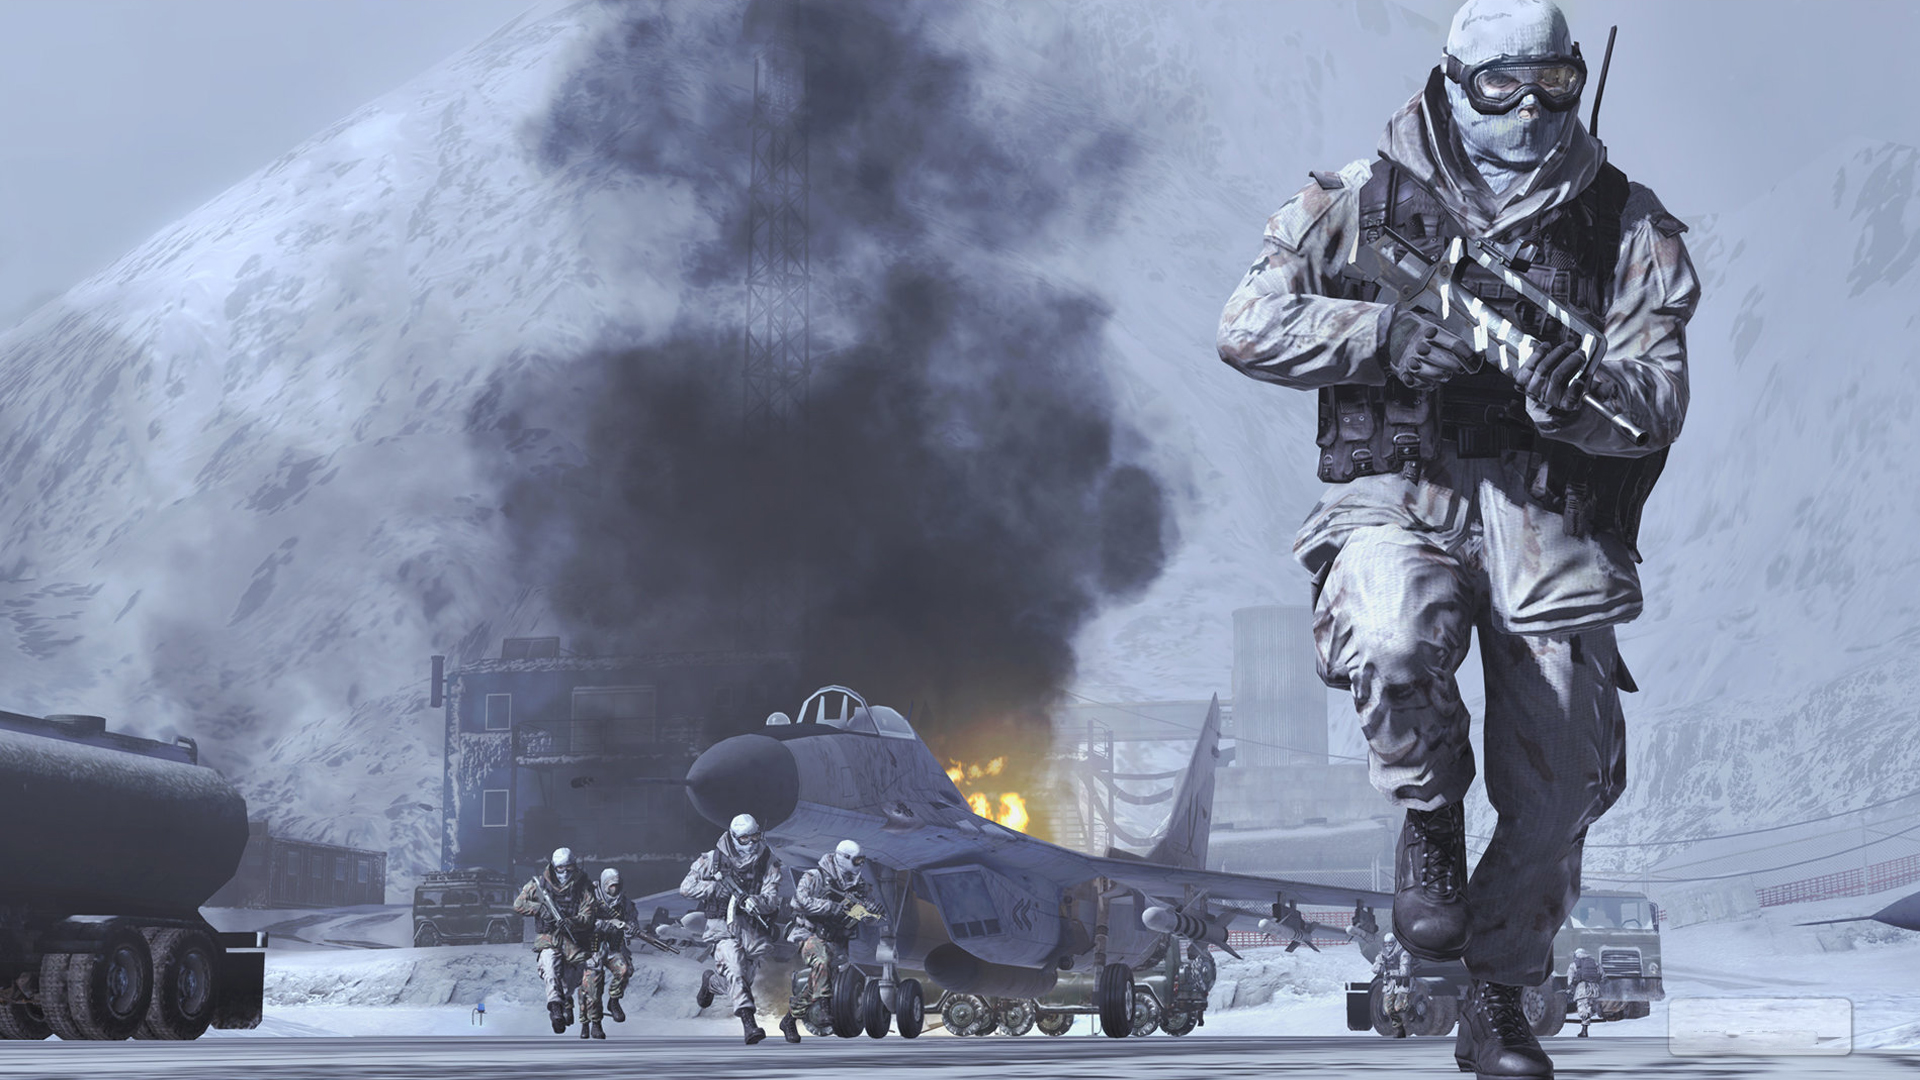 call of duty modern warfare 2 wallpaper free download fully pc games 4